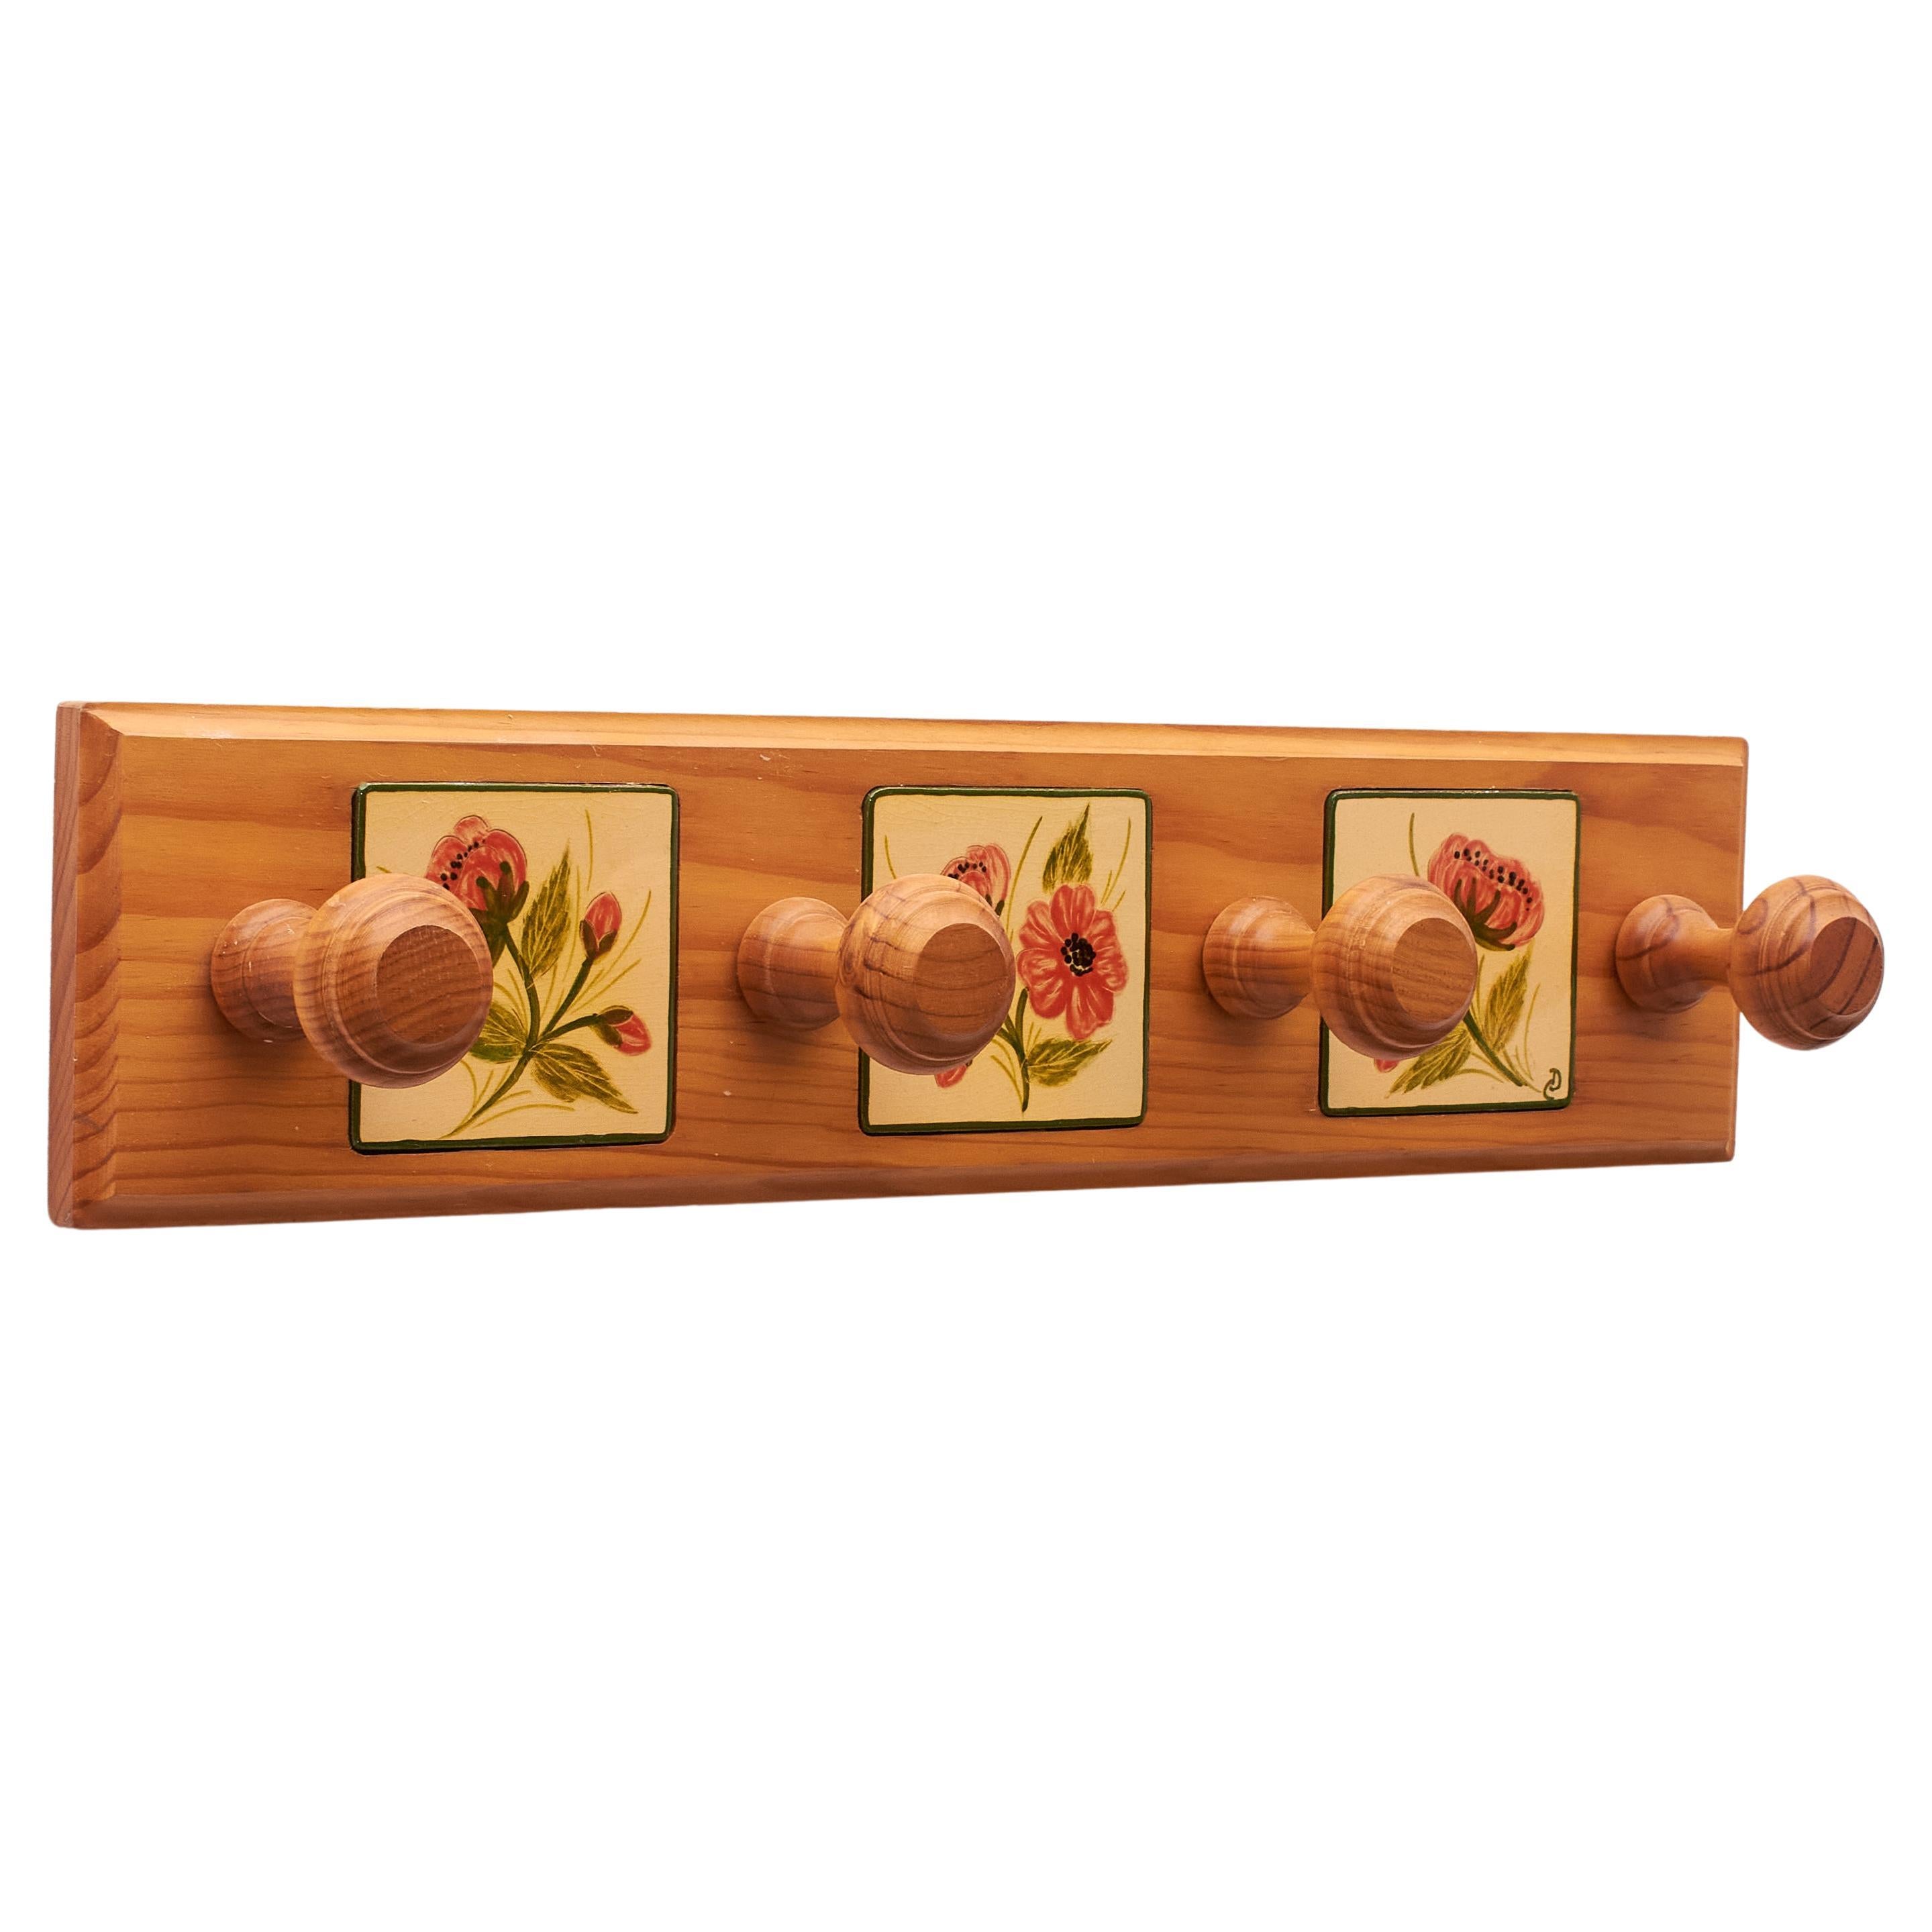 Diaz Costa Wood and Hand Painted Ceramic Wall Hanger, circa 1960 For Sale